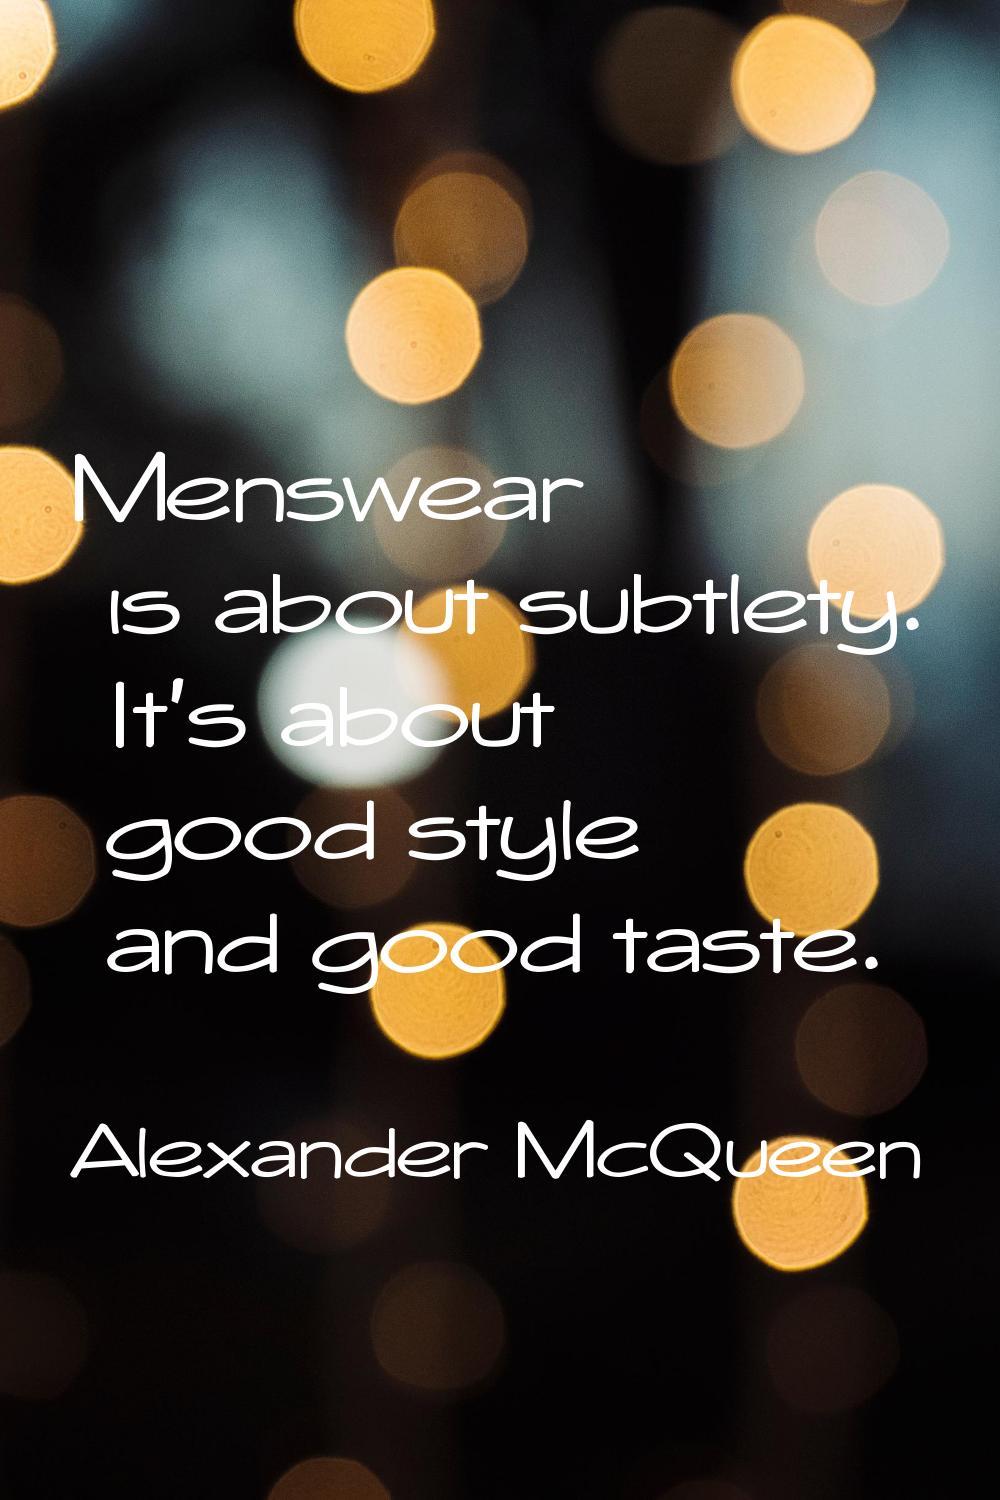 Menswear is about subtlety. It's about good style and good taste.